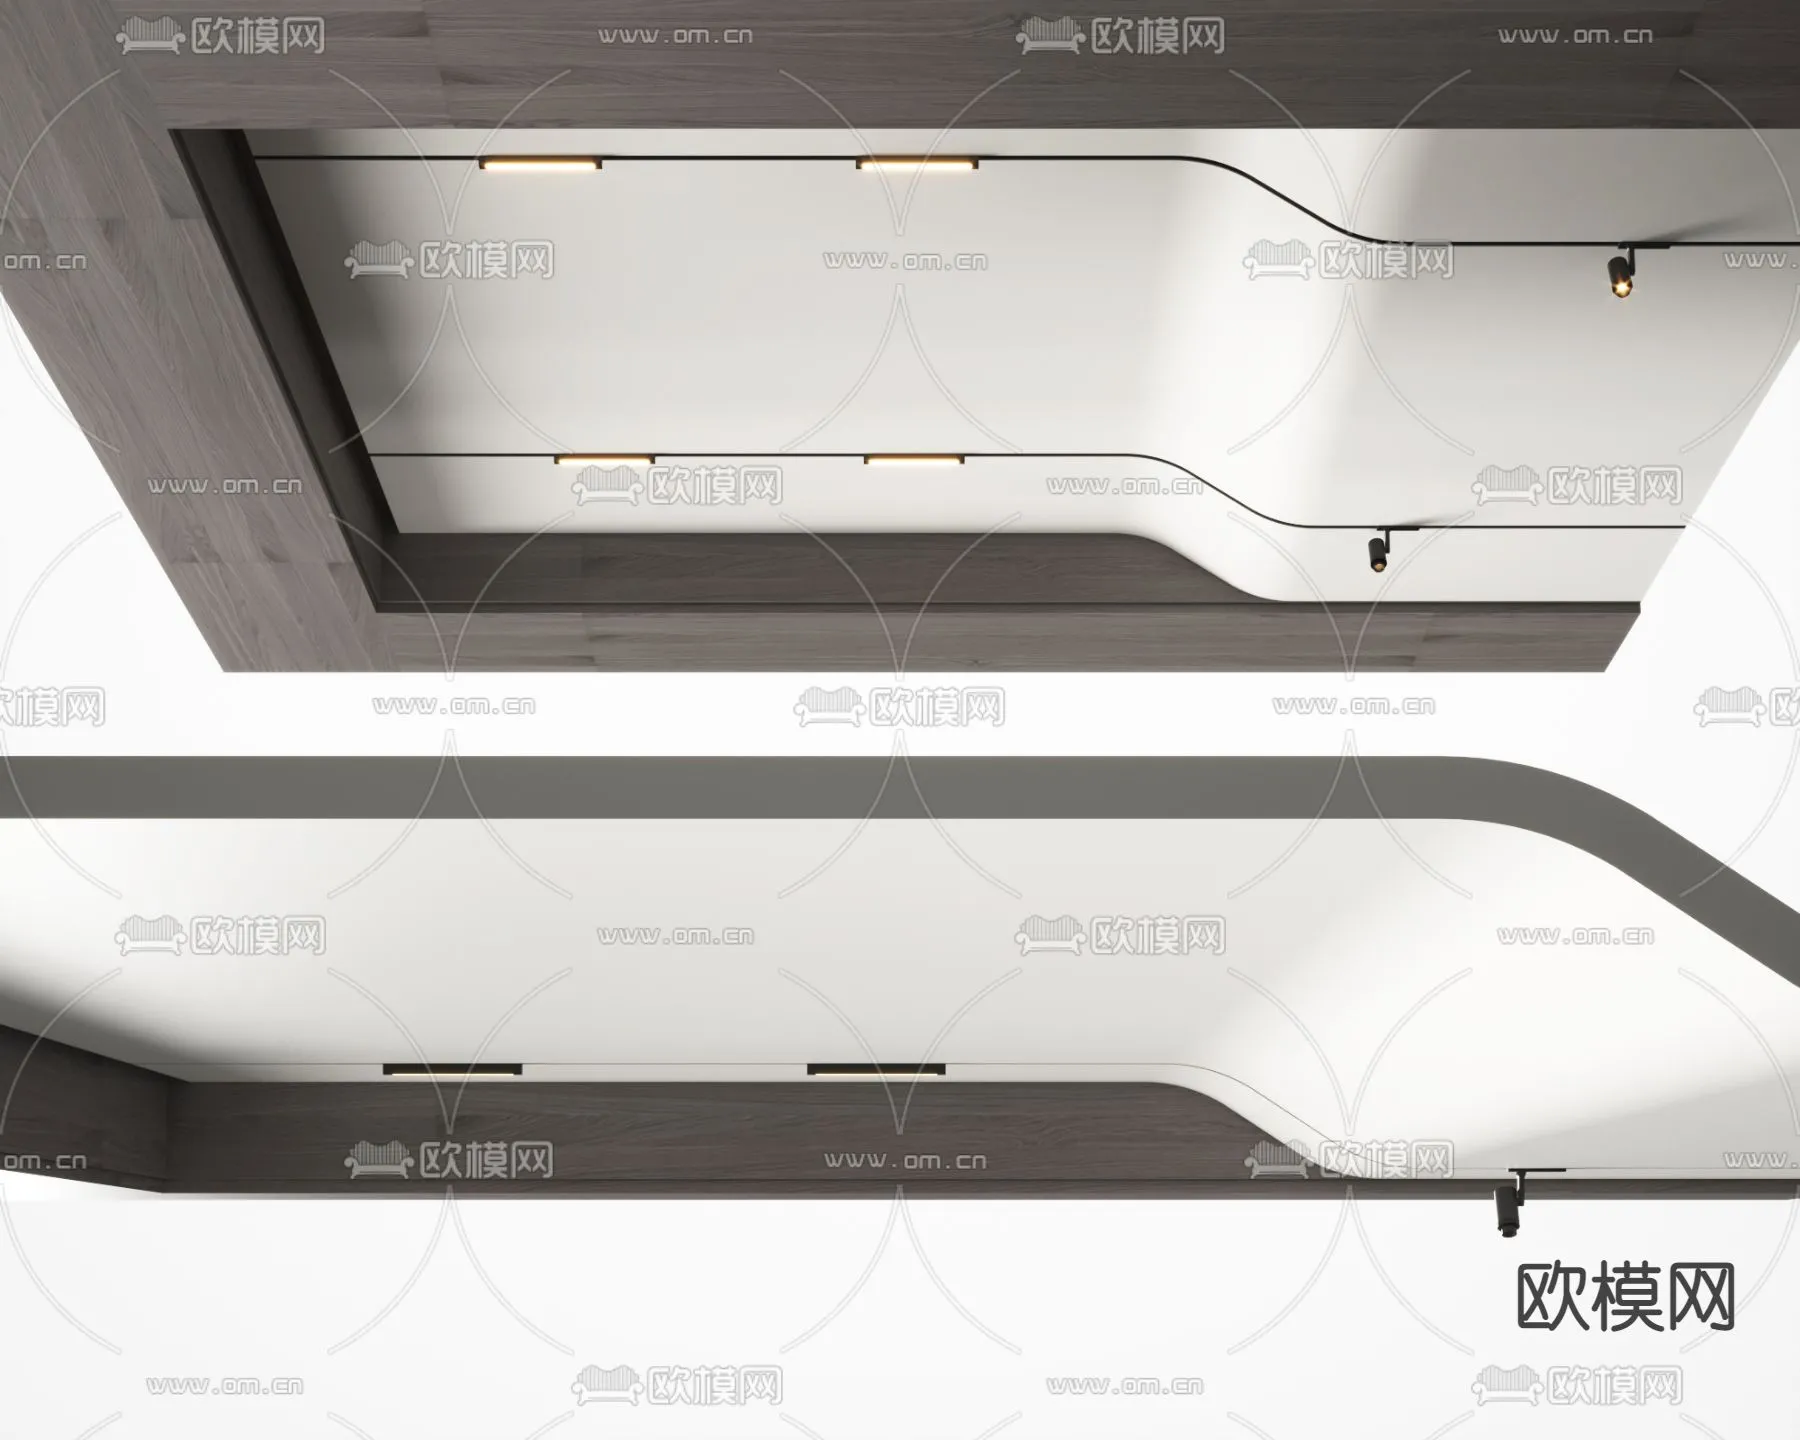 3DS MAX – DETAIL – CEILING – VRAY / CORONA – 3D MODEL – 3145